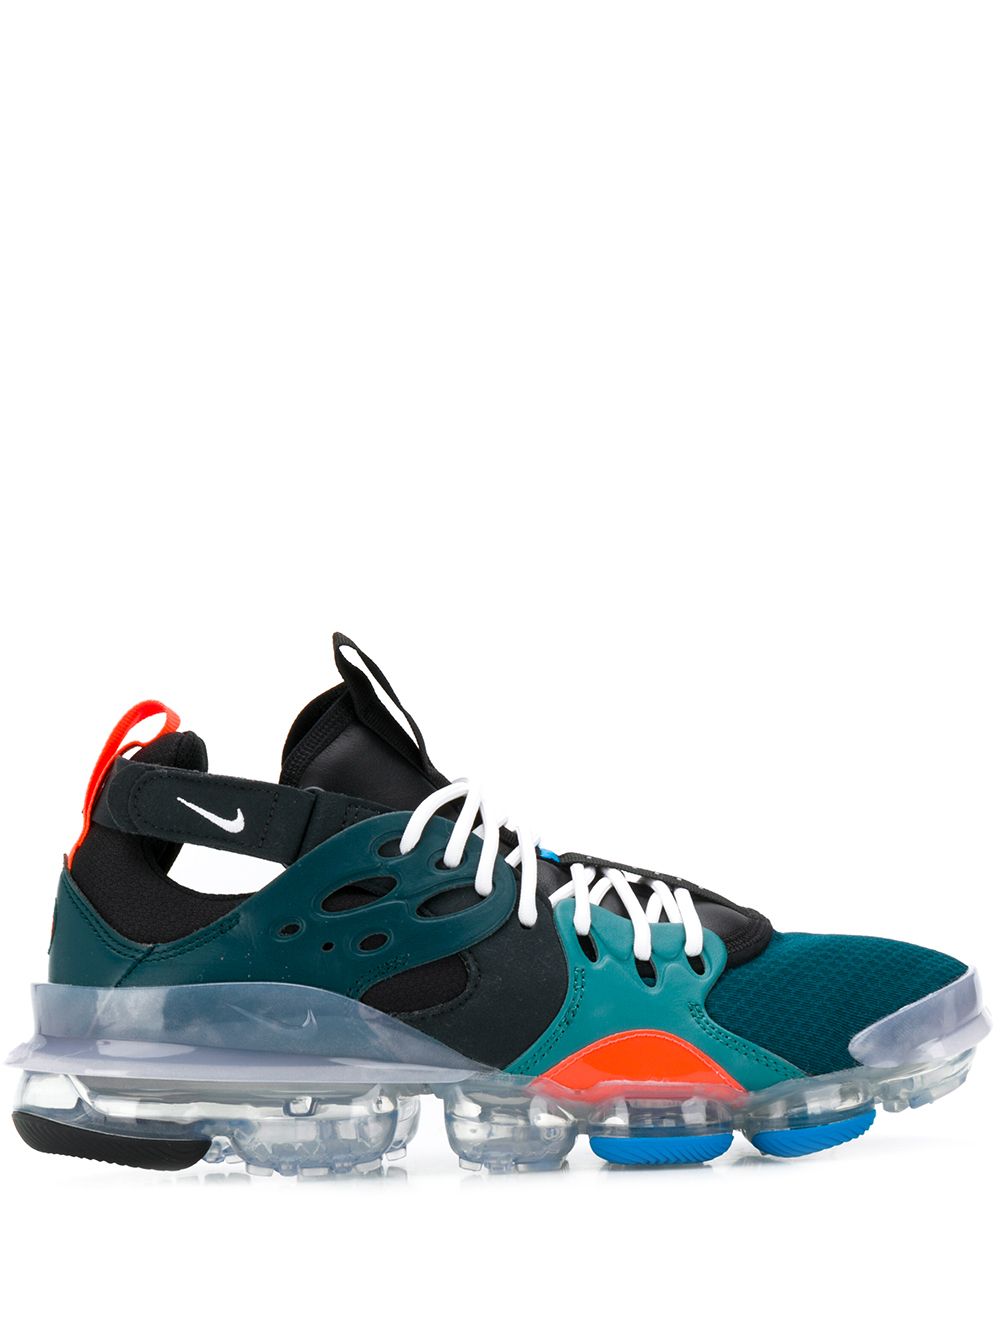 Nike Air Vapormax Dsvm Trainers Aw19 